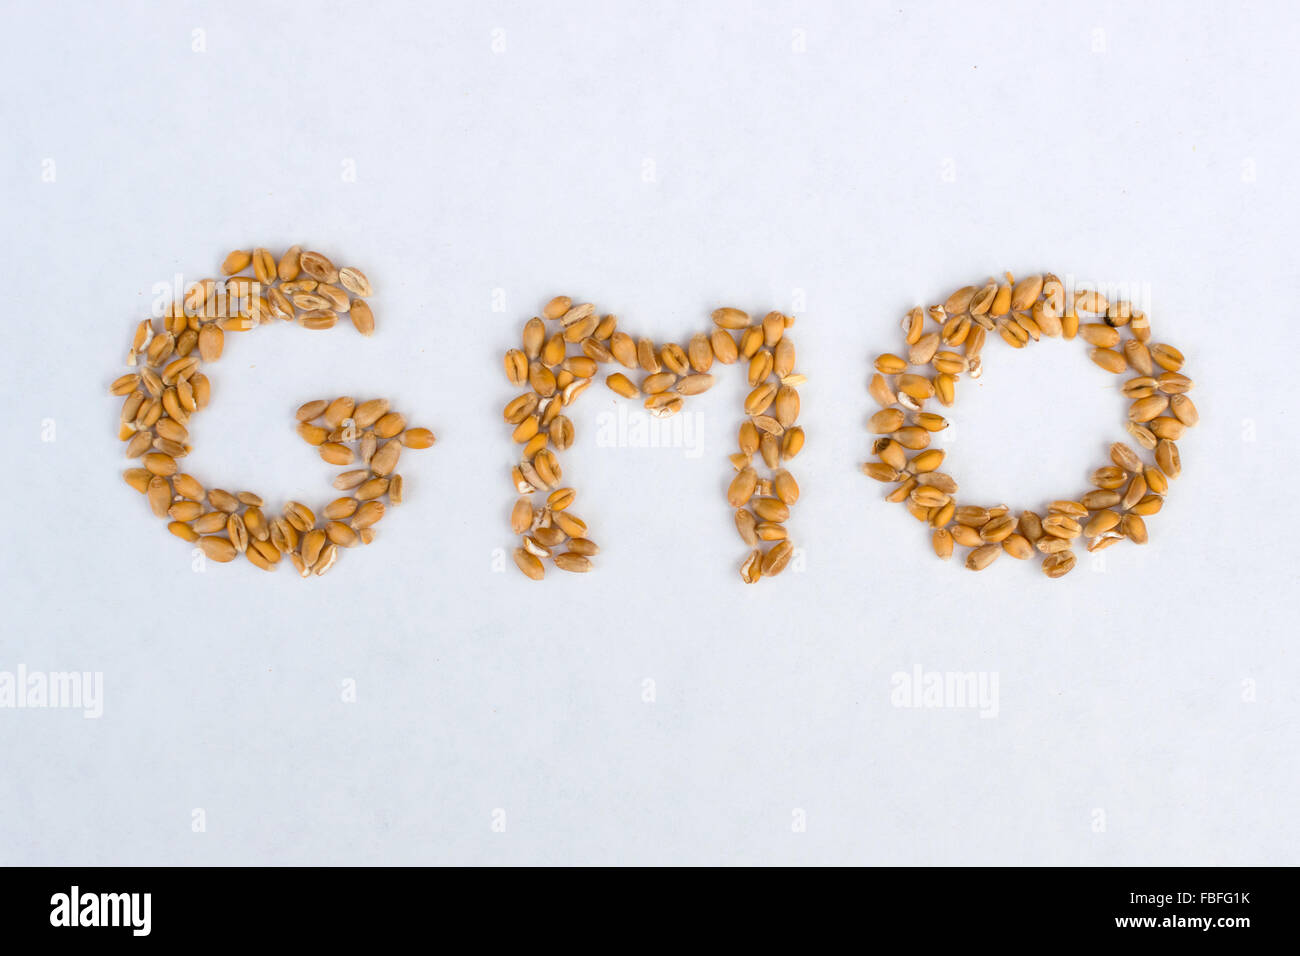 GMO concept from seeds Stock Photo